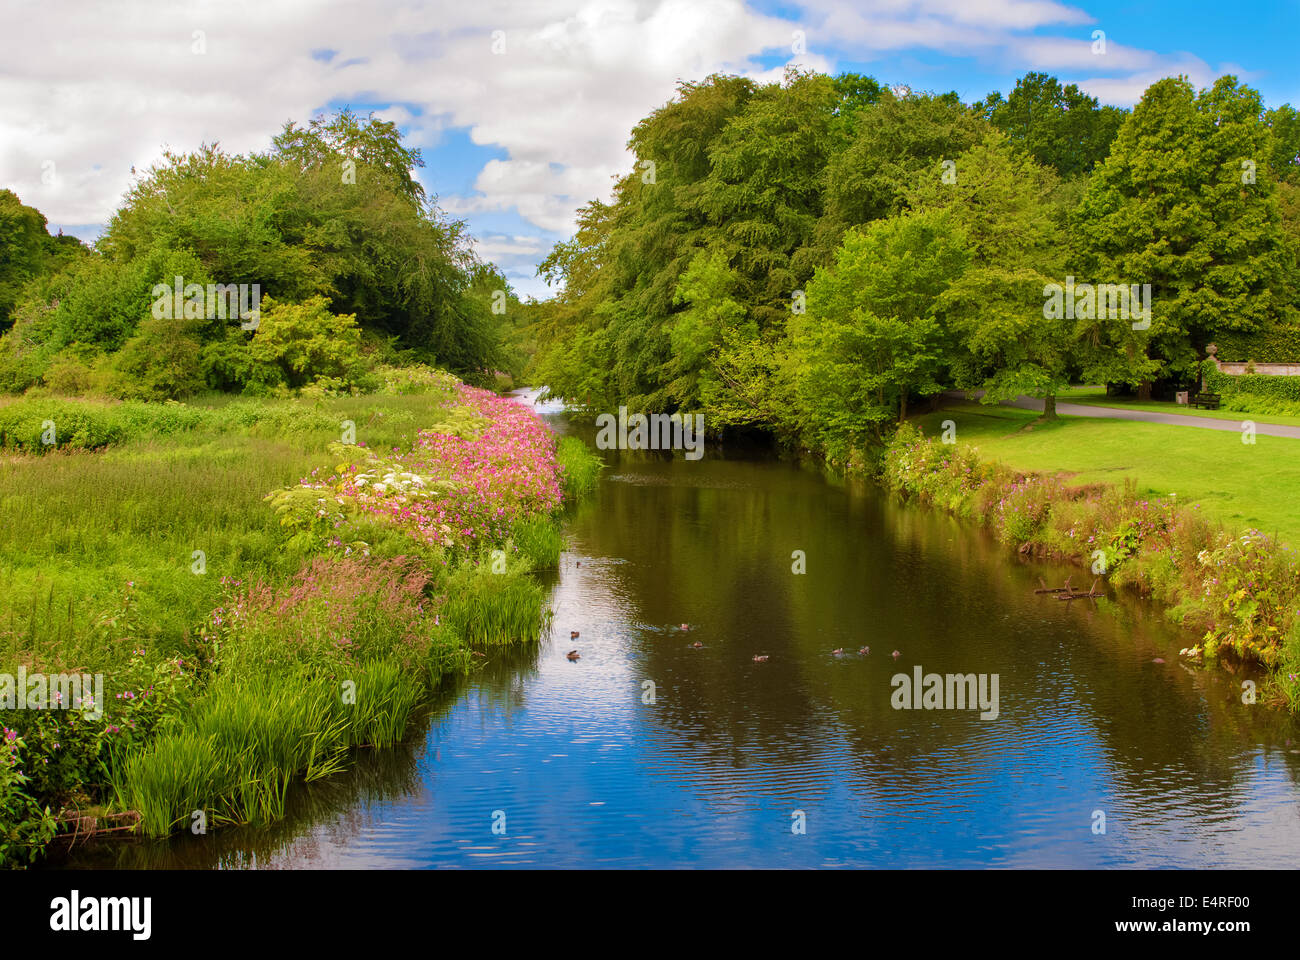 Picturesque view of a narrow river in Scotland Stock Photo